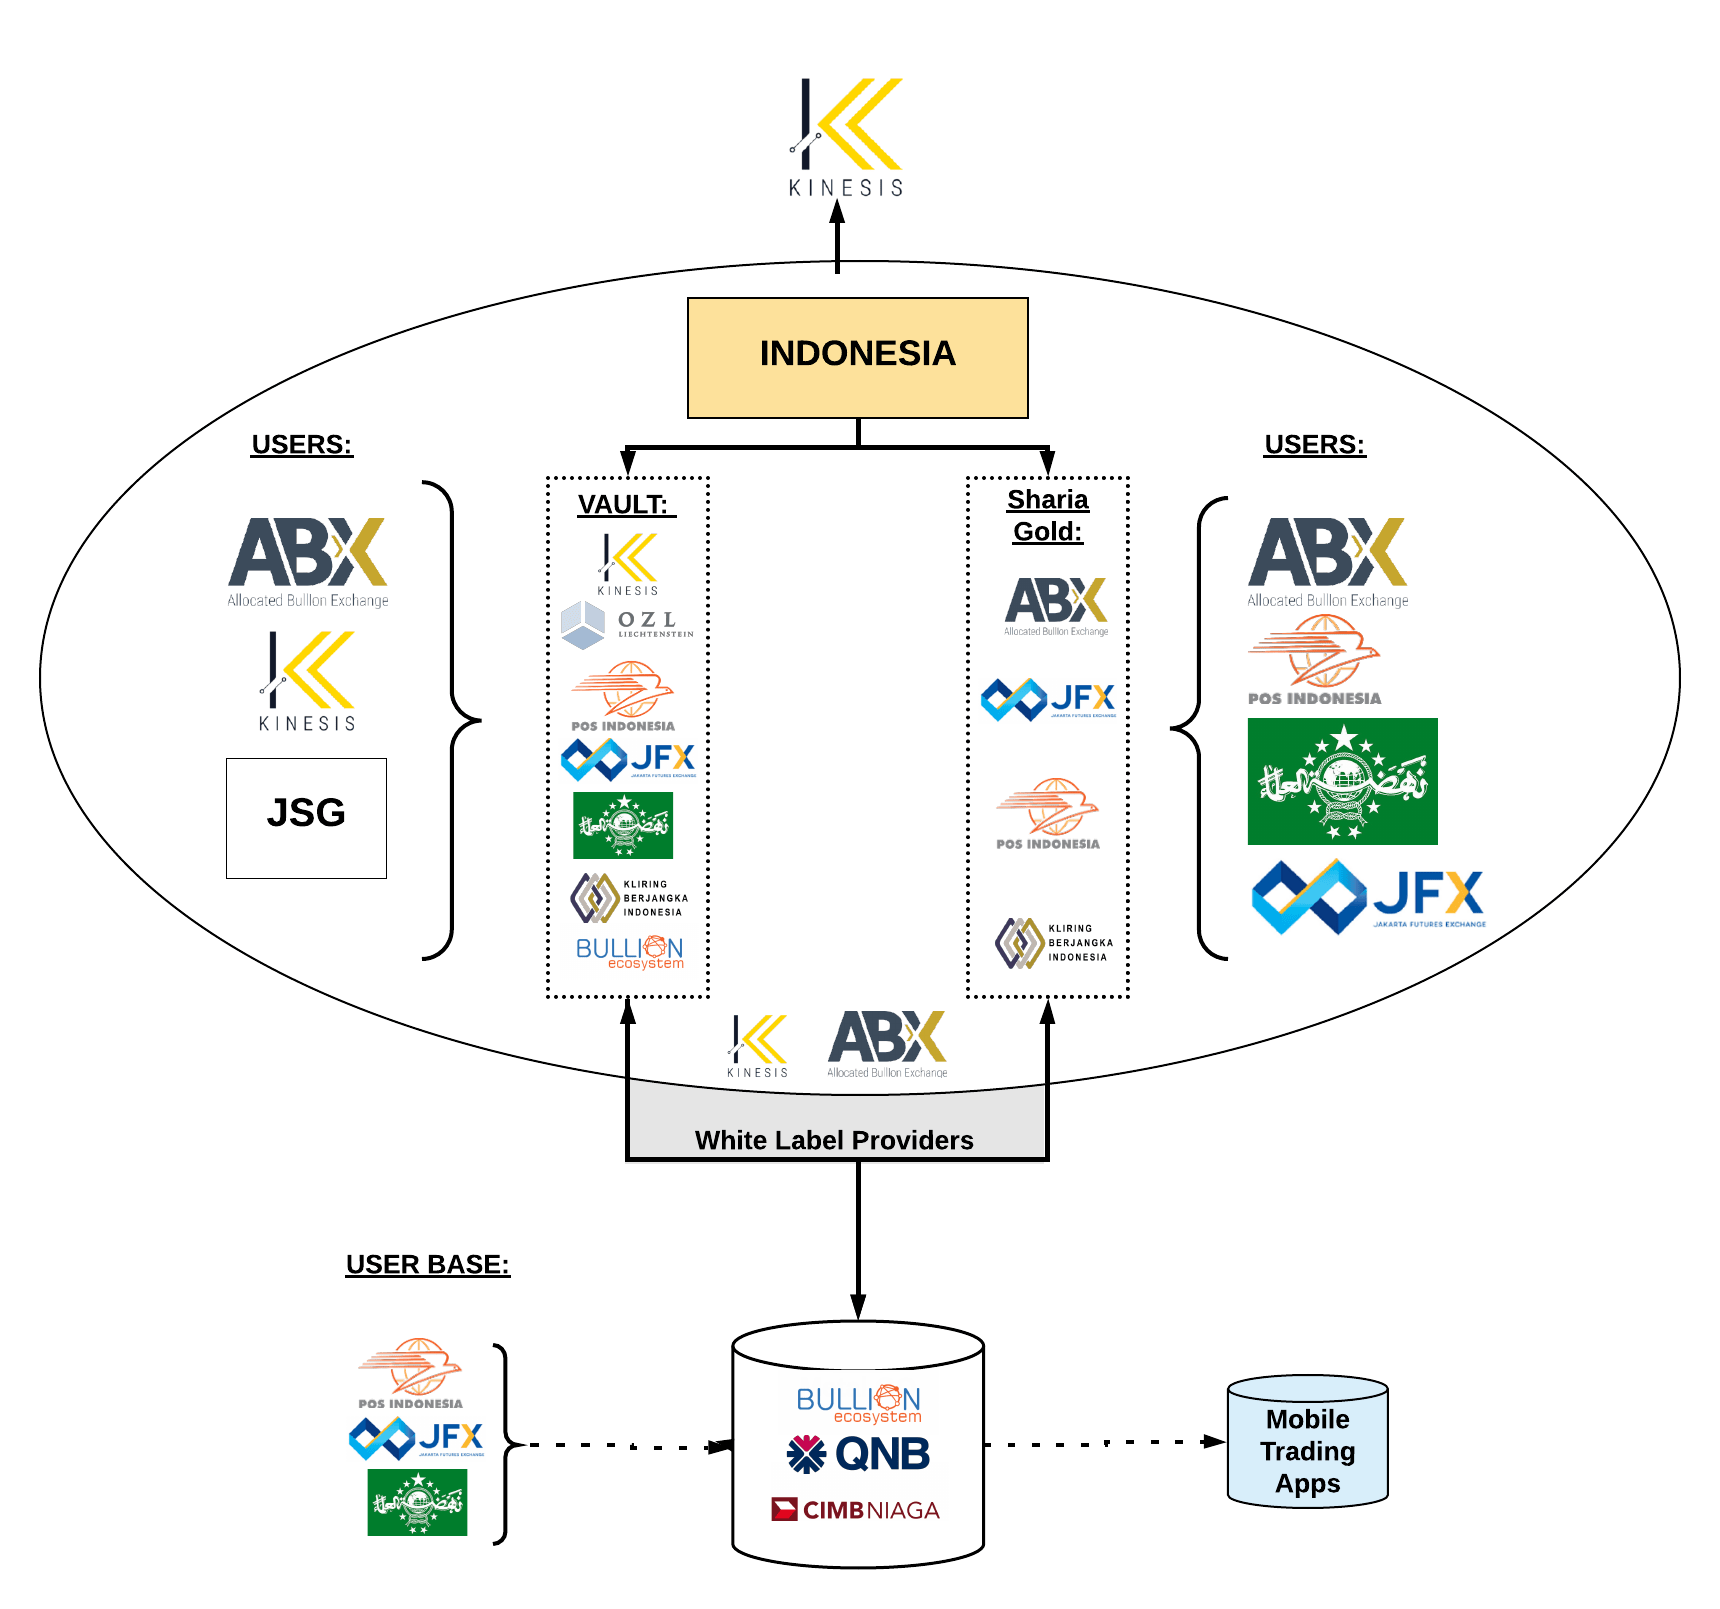 kinesis partnership whitelabel chart for shariah compliant exchange in indonesia with ABX, JFX, POSGO, OZL